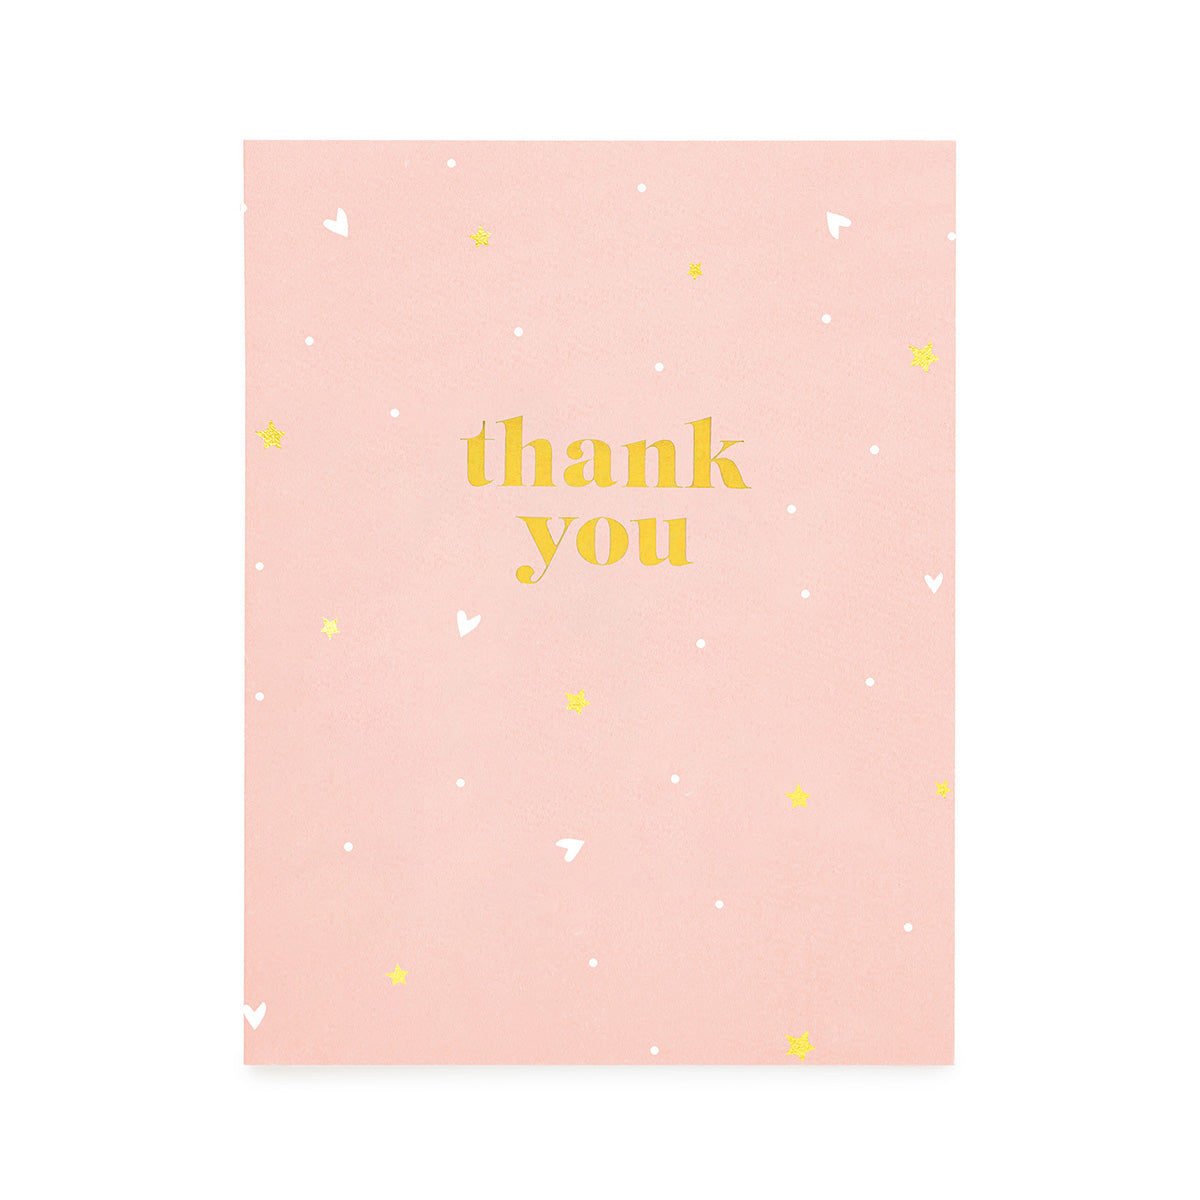 rose thank you card with hearts and stars and gold text